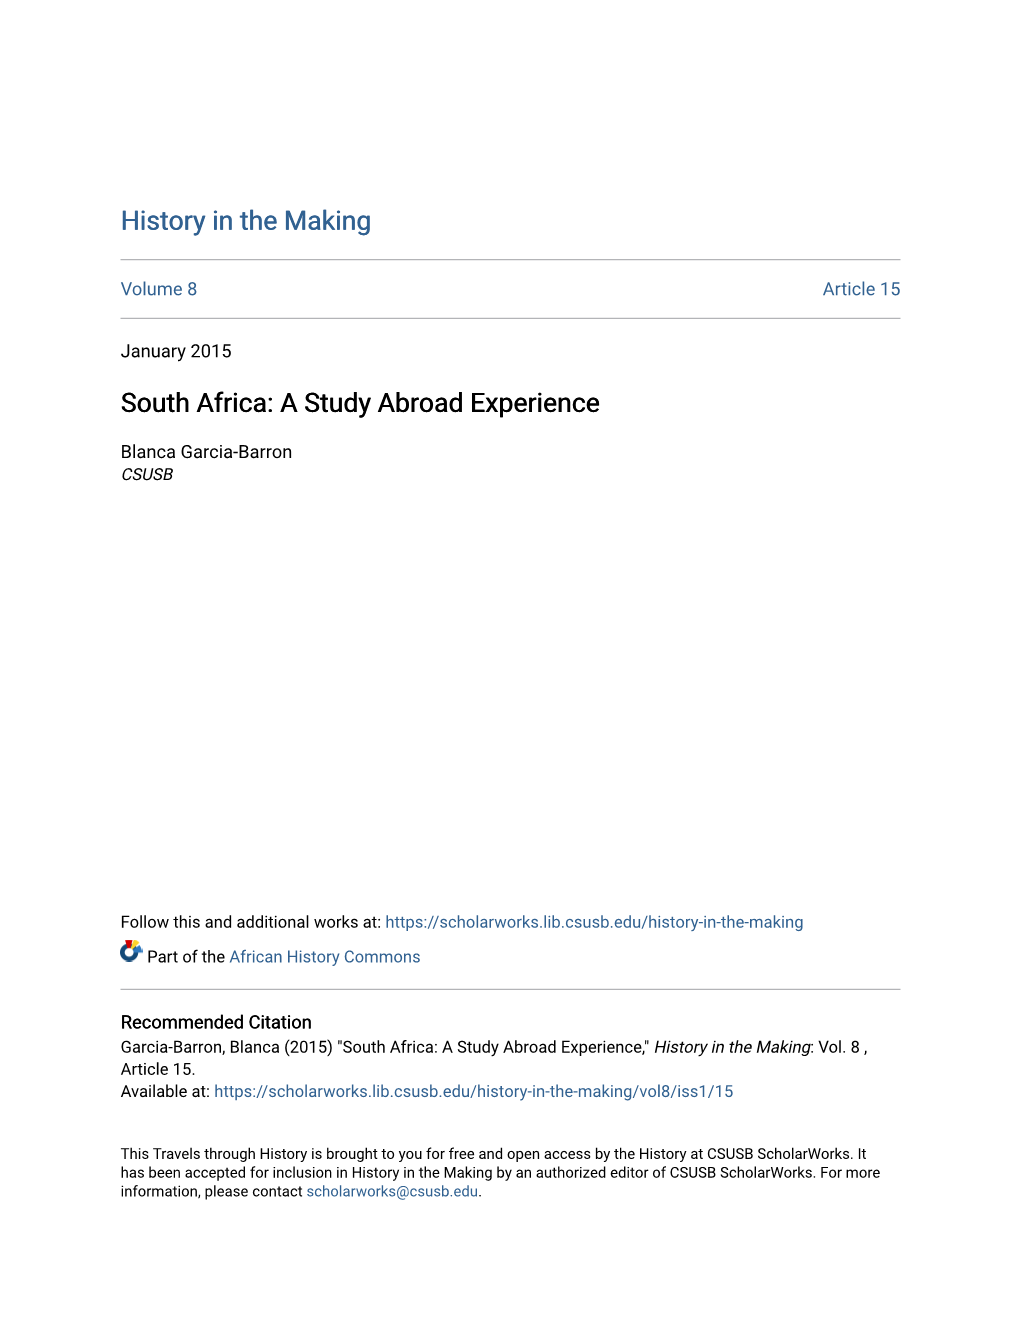 South Africa: a Study Abroad Experience